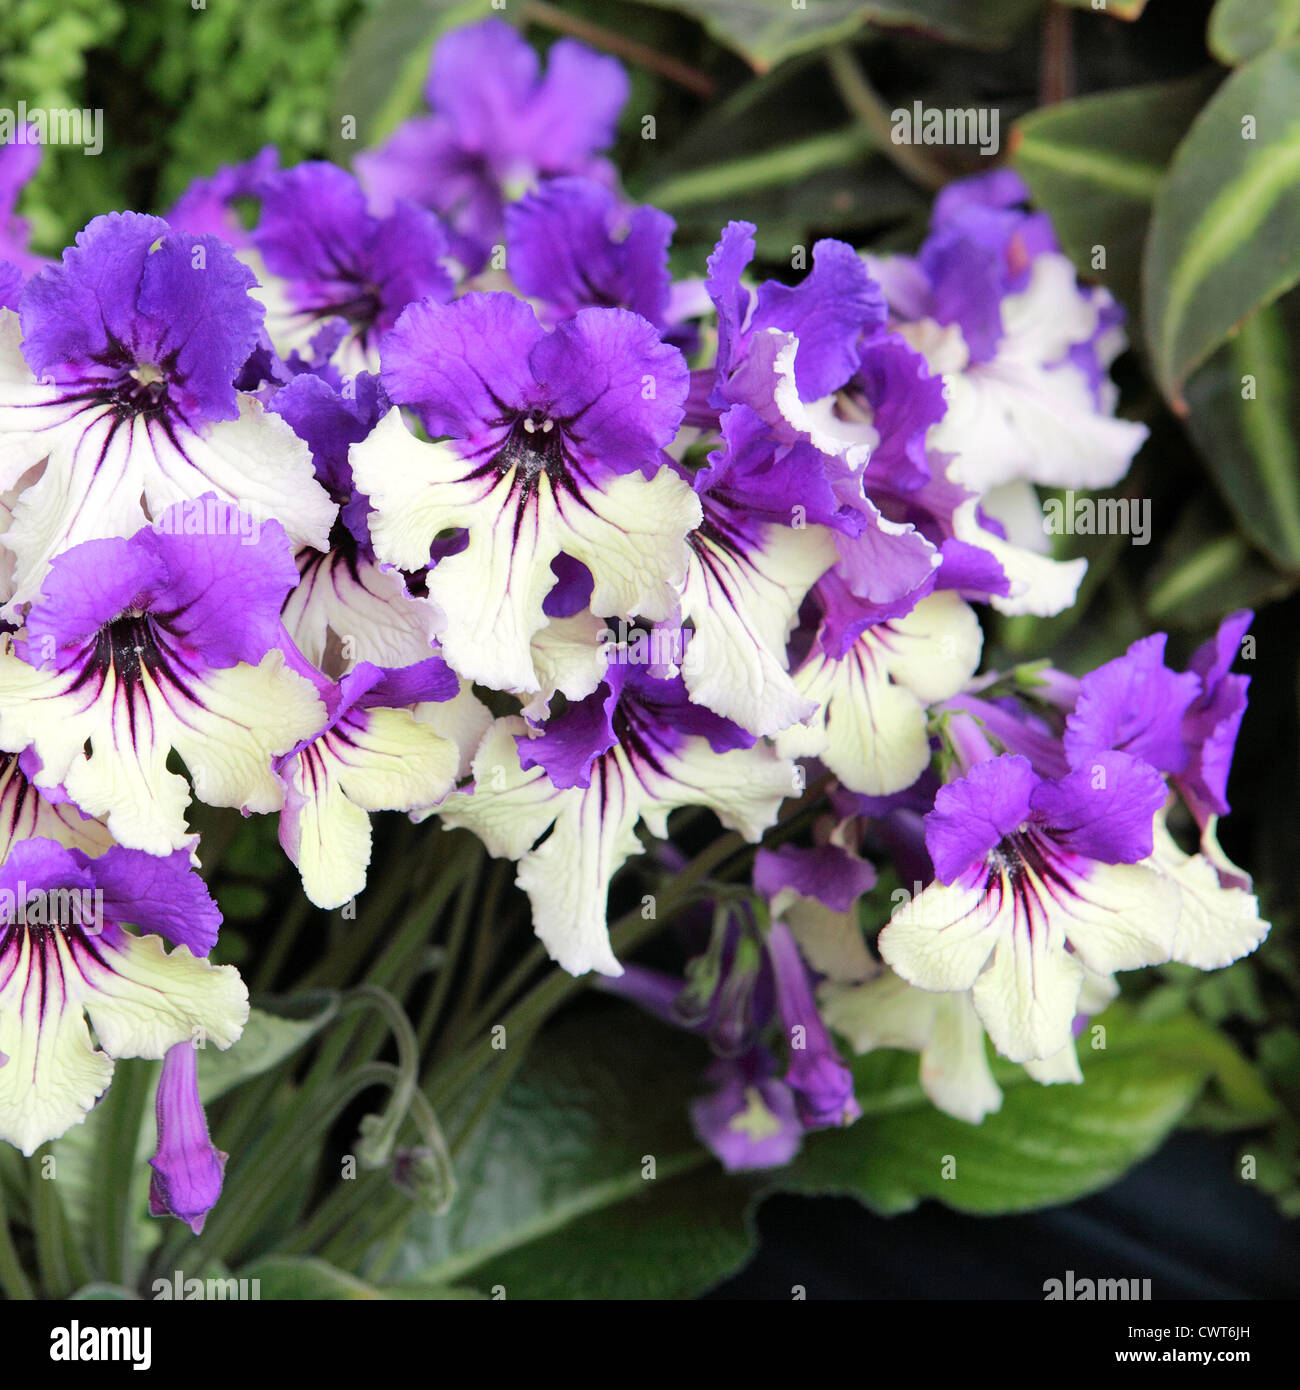 Fine example of an Streptocarpus 'Harlequin Delft' set against a background of green foliage. Stock Photo